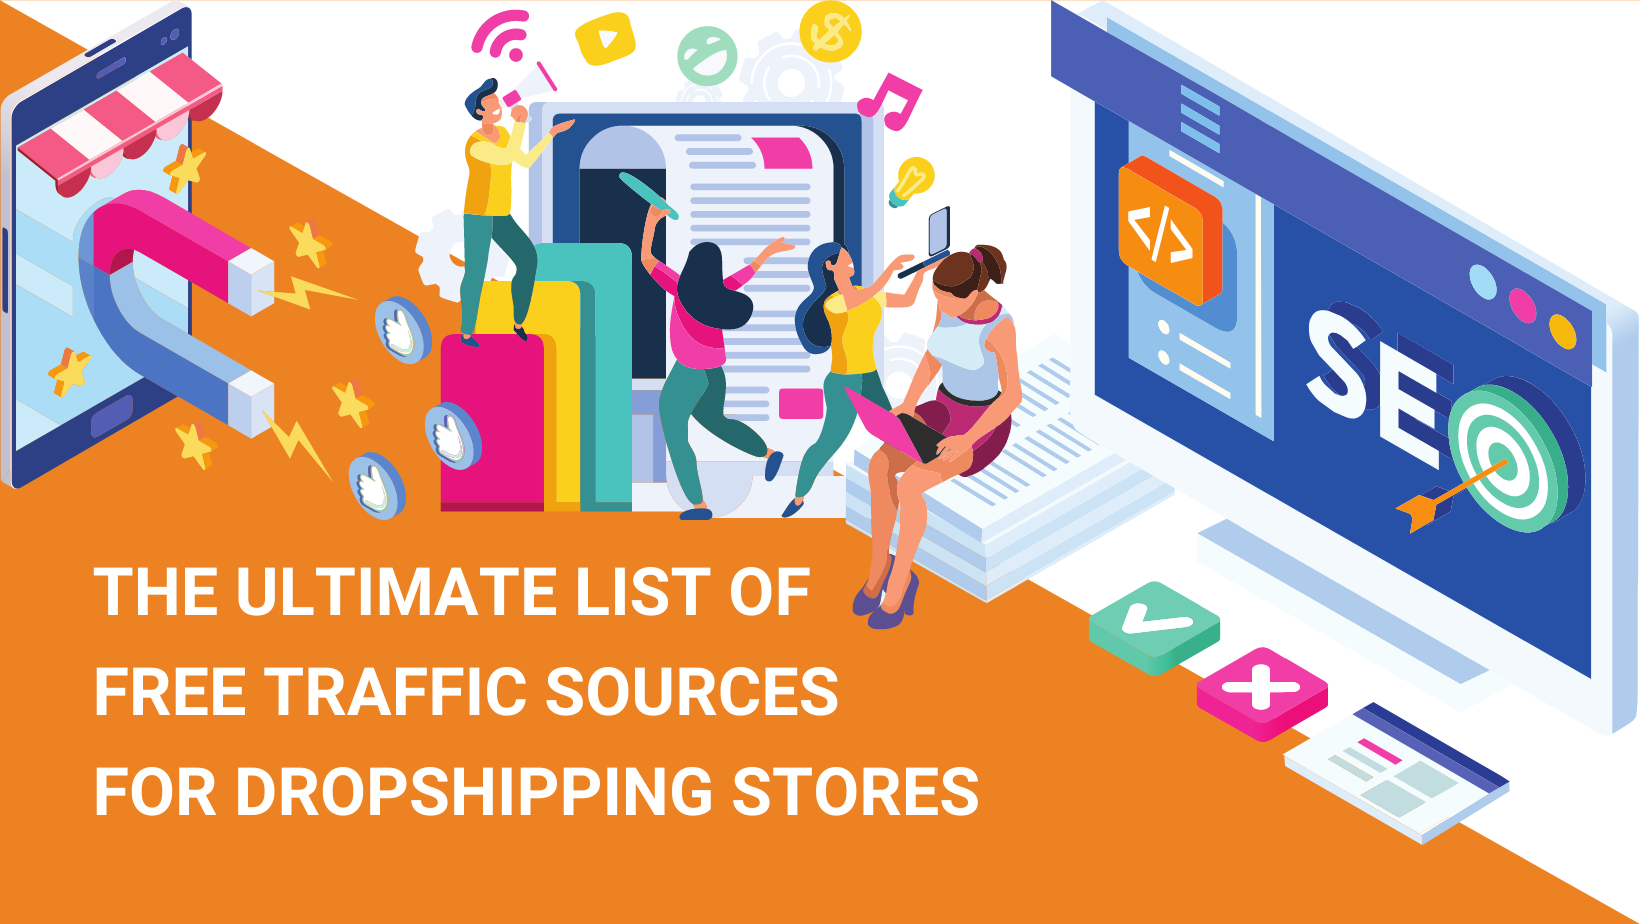 THE ULTIMATE LIST OF FREE TRAFFIC SOURCES FOR DROPSHIPPING STORES